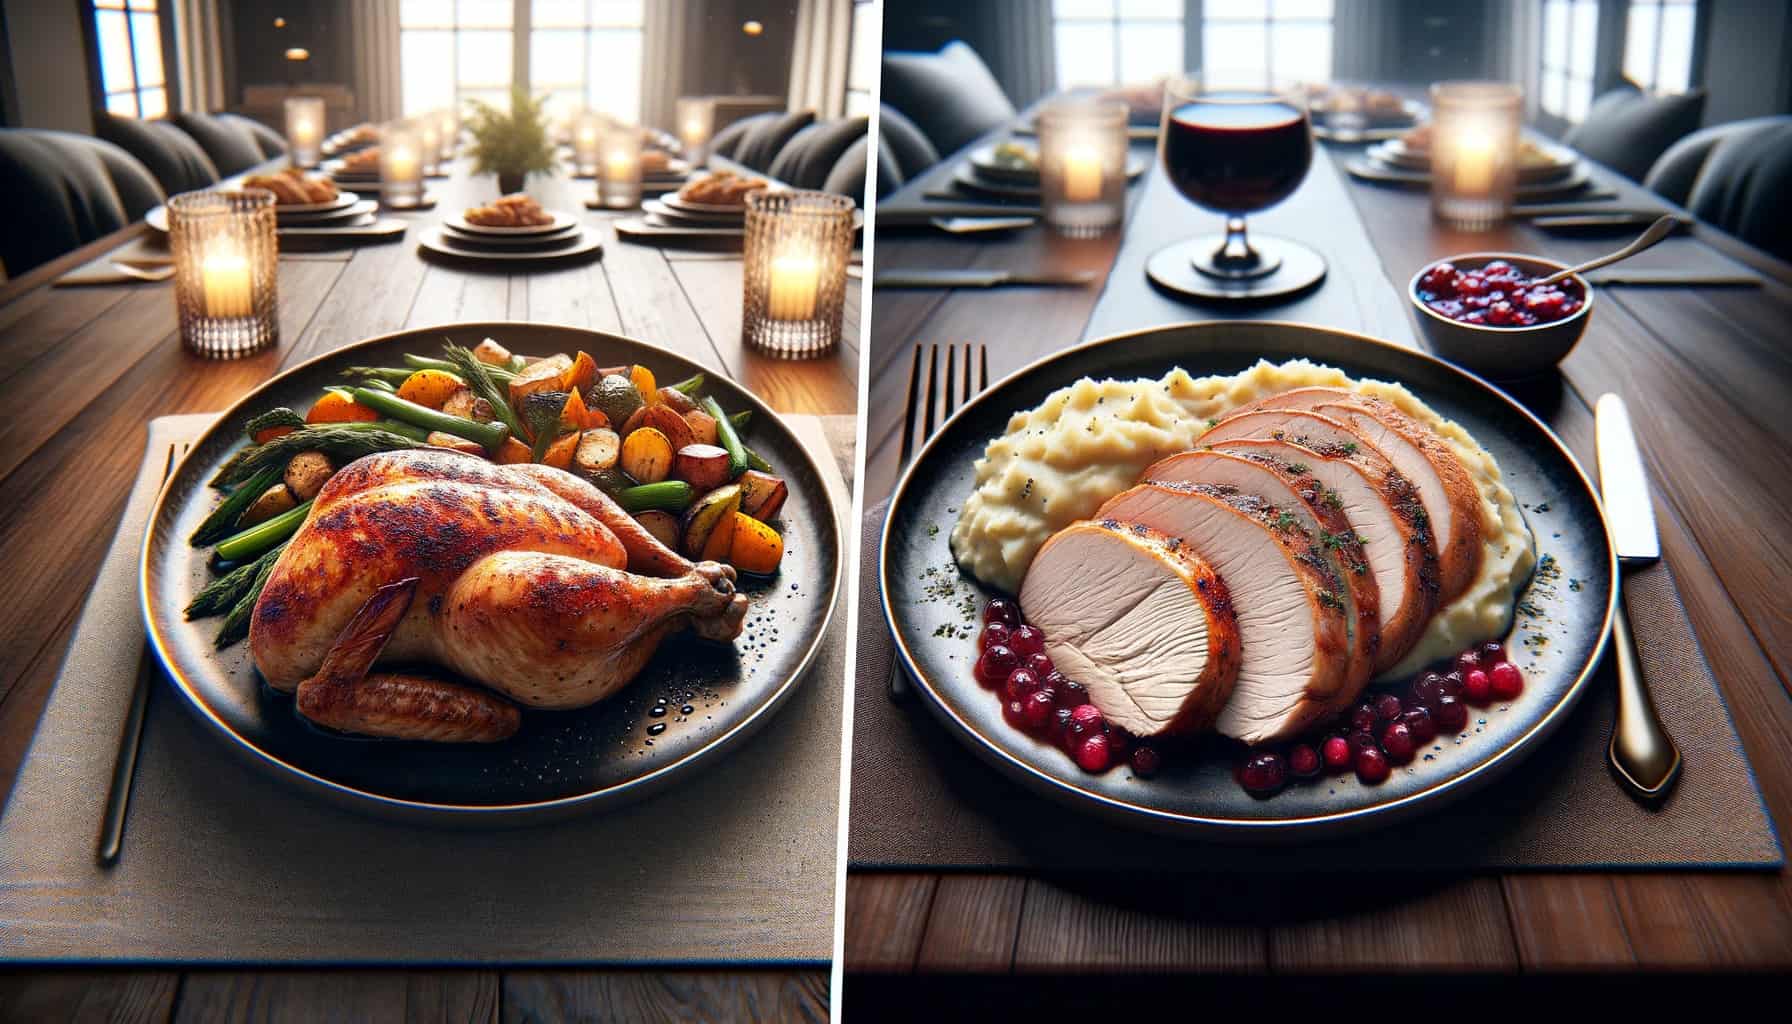 Two separate meals, one with chicken and the other with turkey